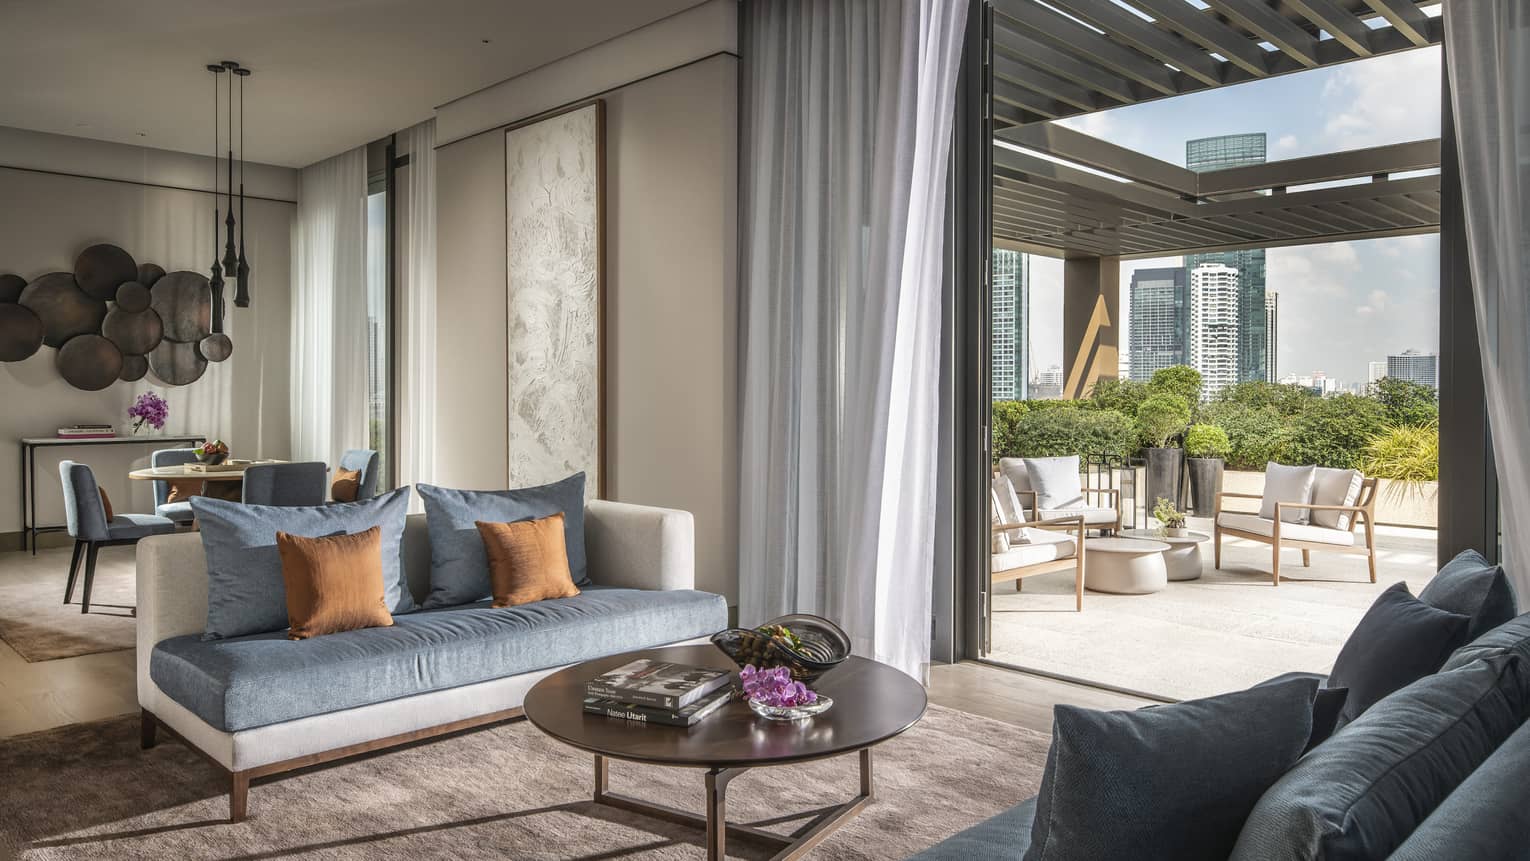 Hotel suite's living room opening up to a terrace with outdoor seating